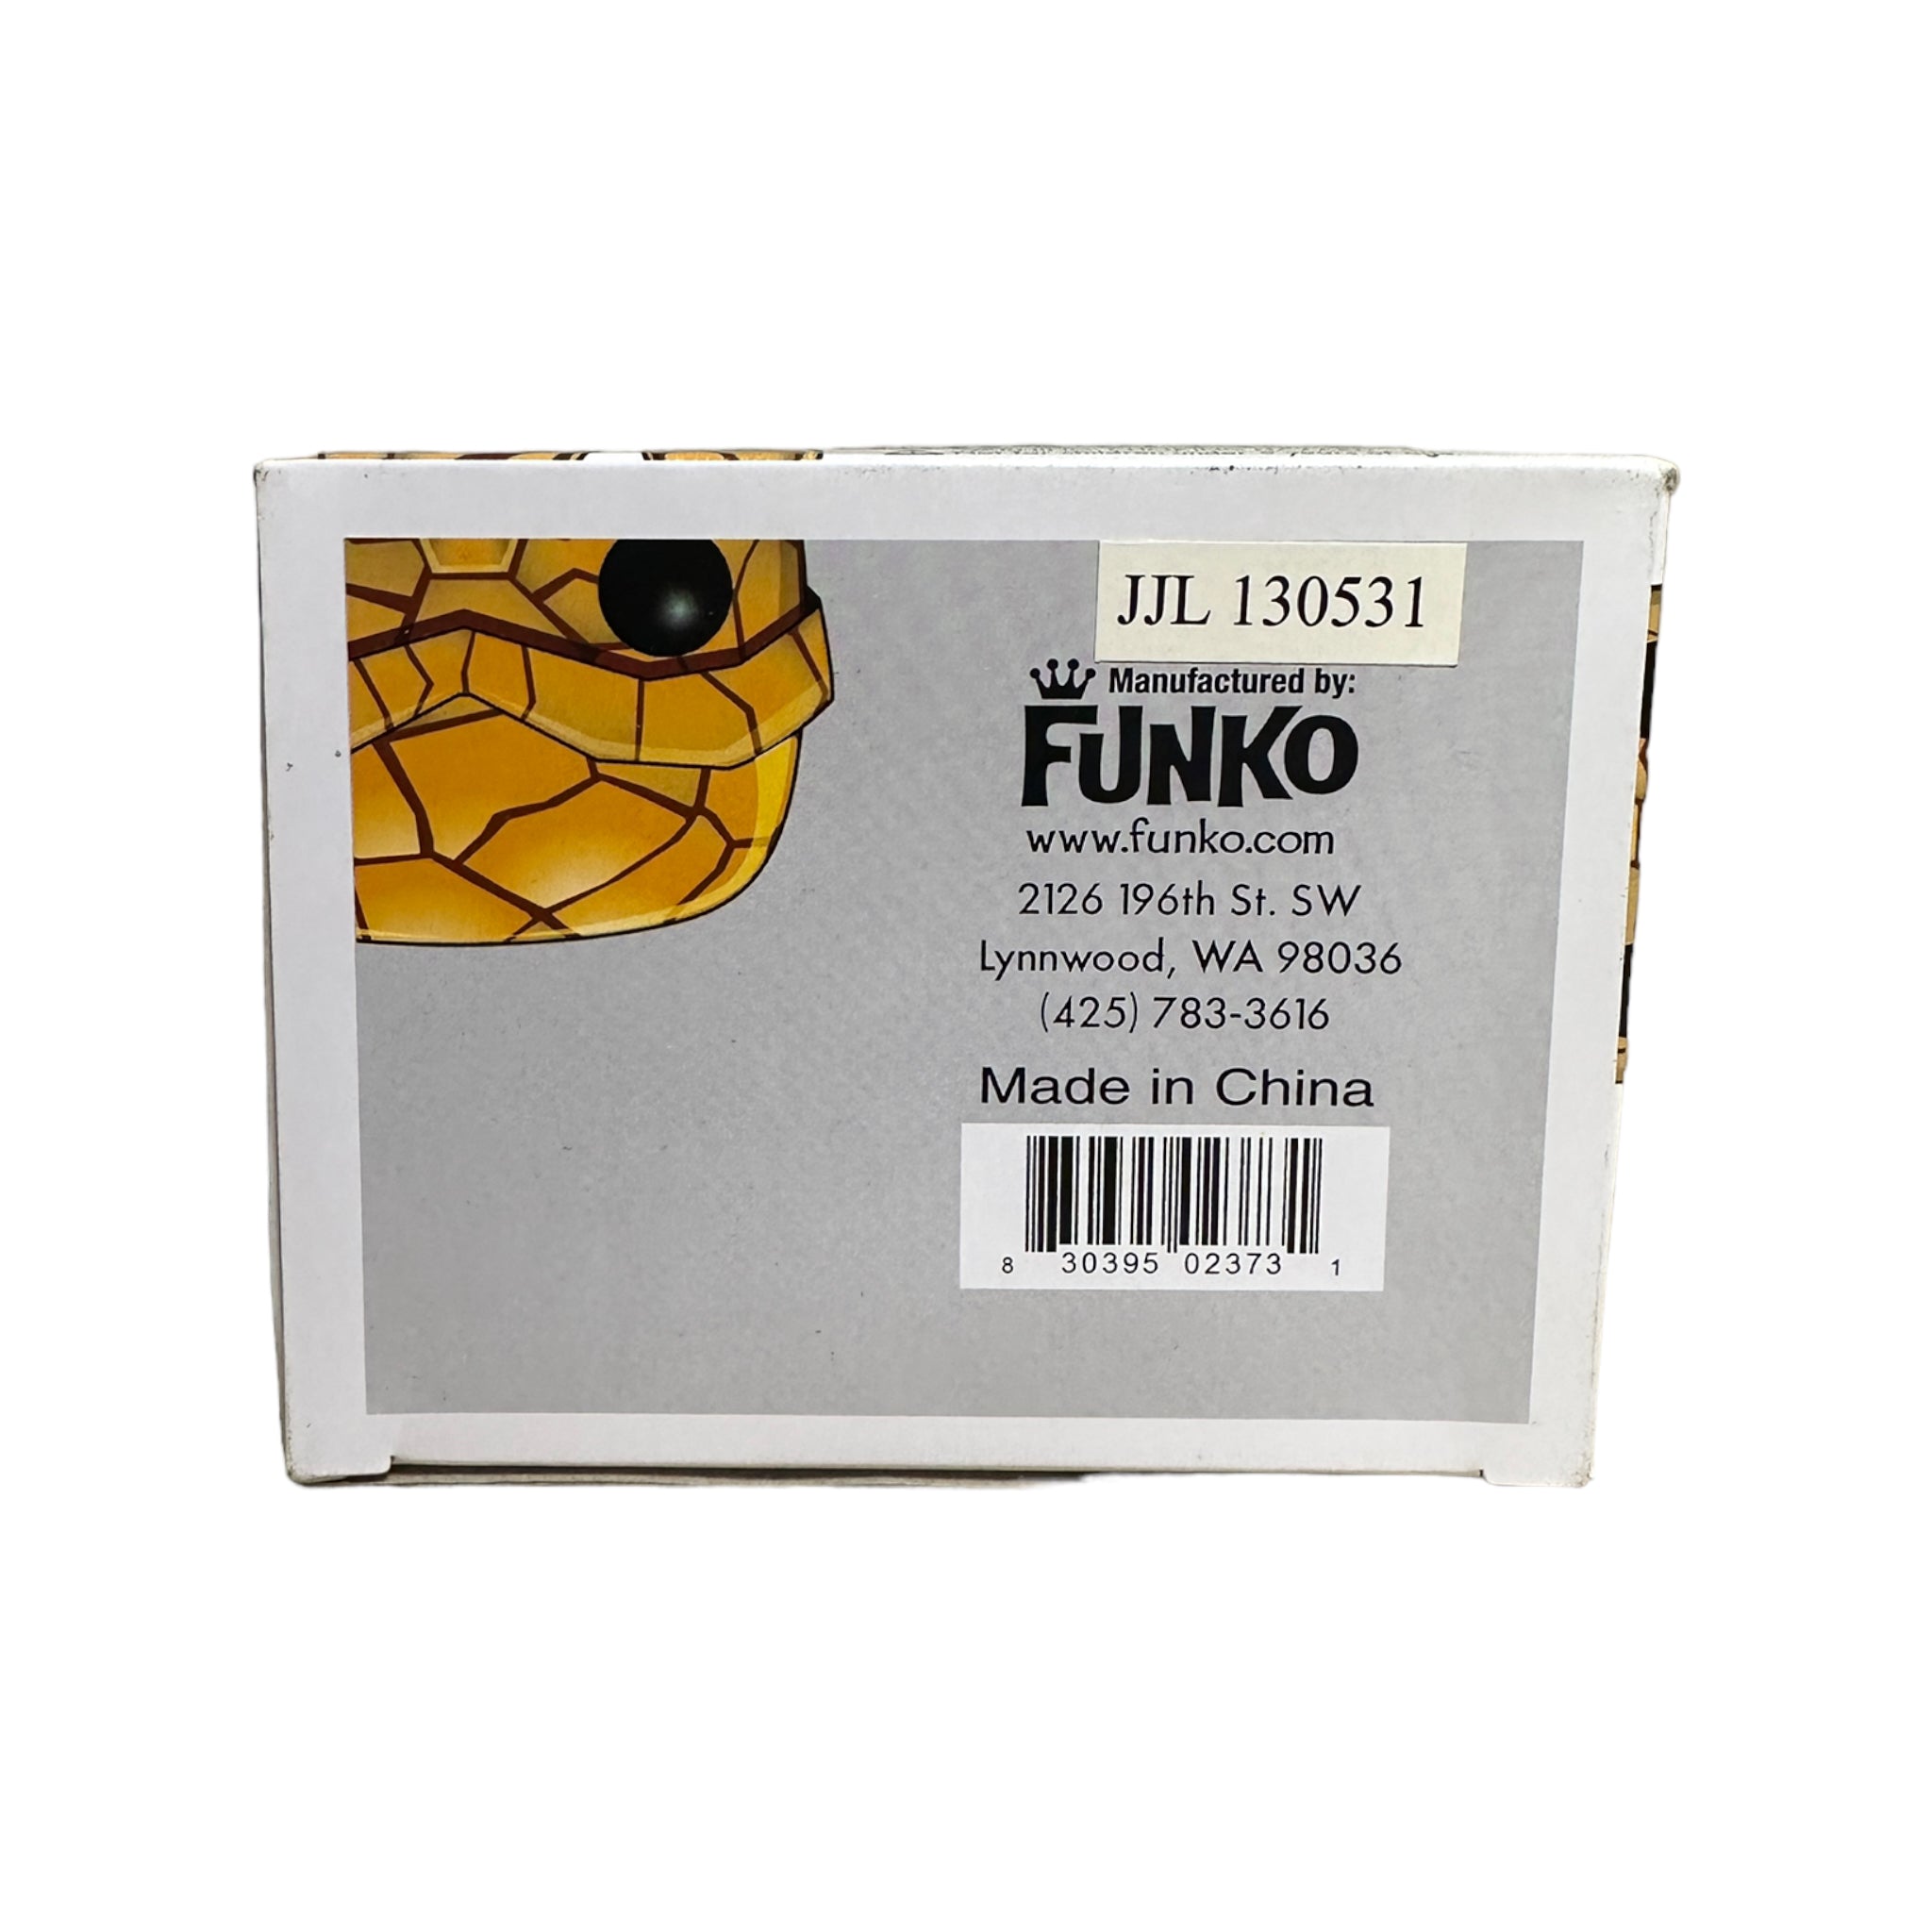 The Thing #09 (Black and White) Funko Pop! - Marvel Universe - Gemini Collectibles Exclusive - Condition 7.5/10